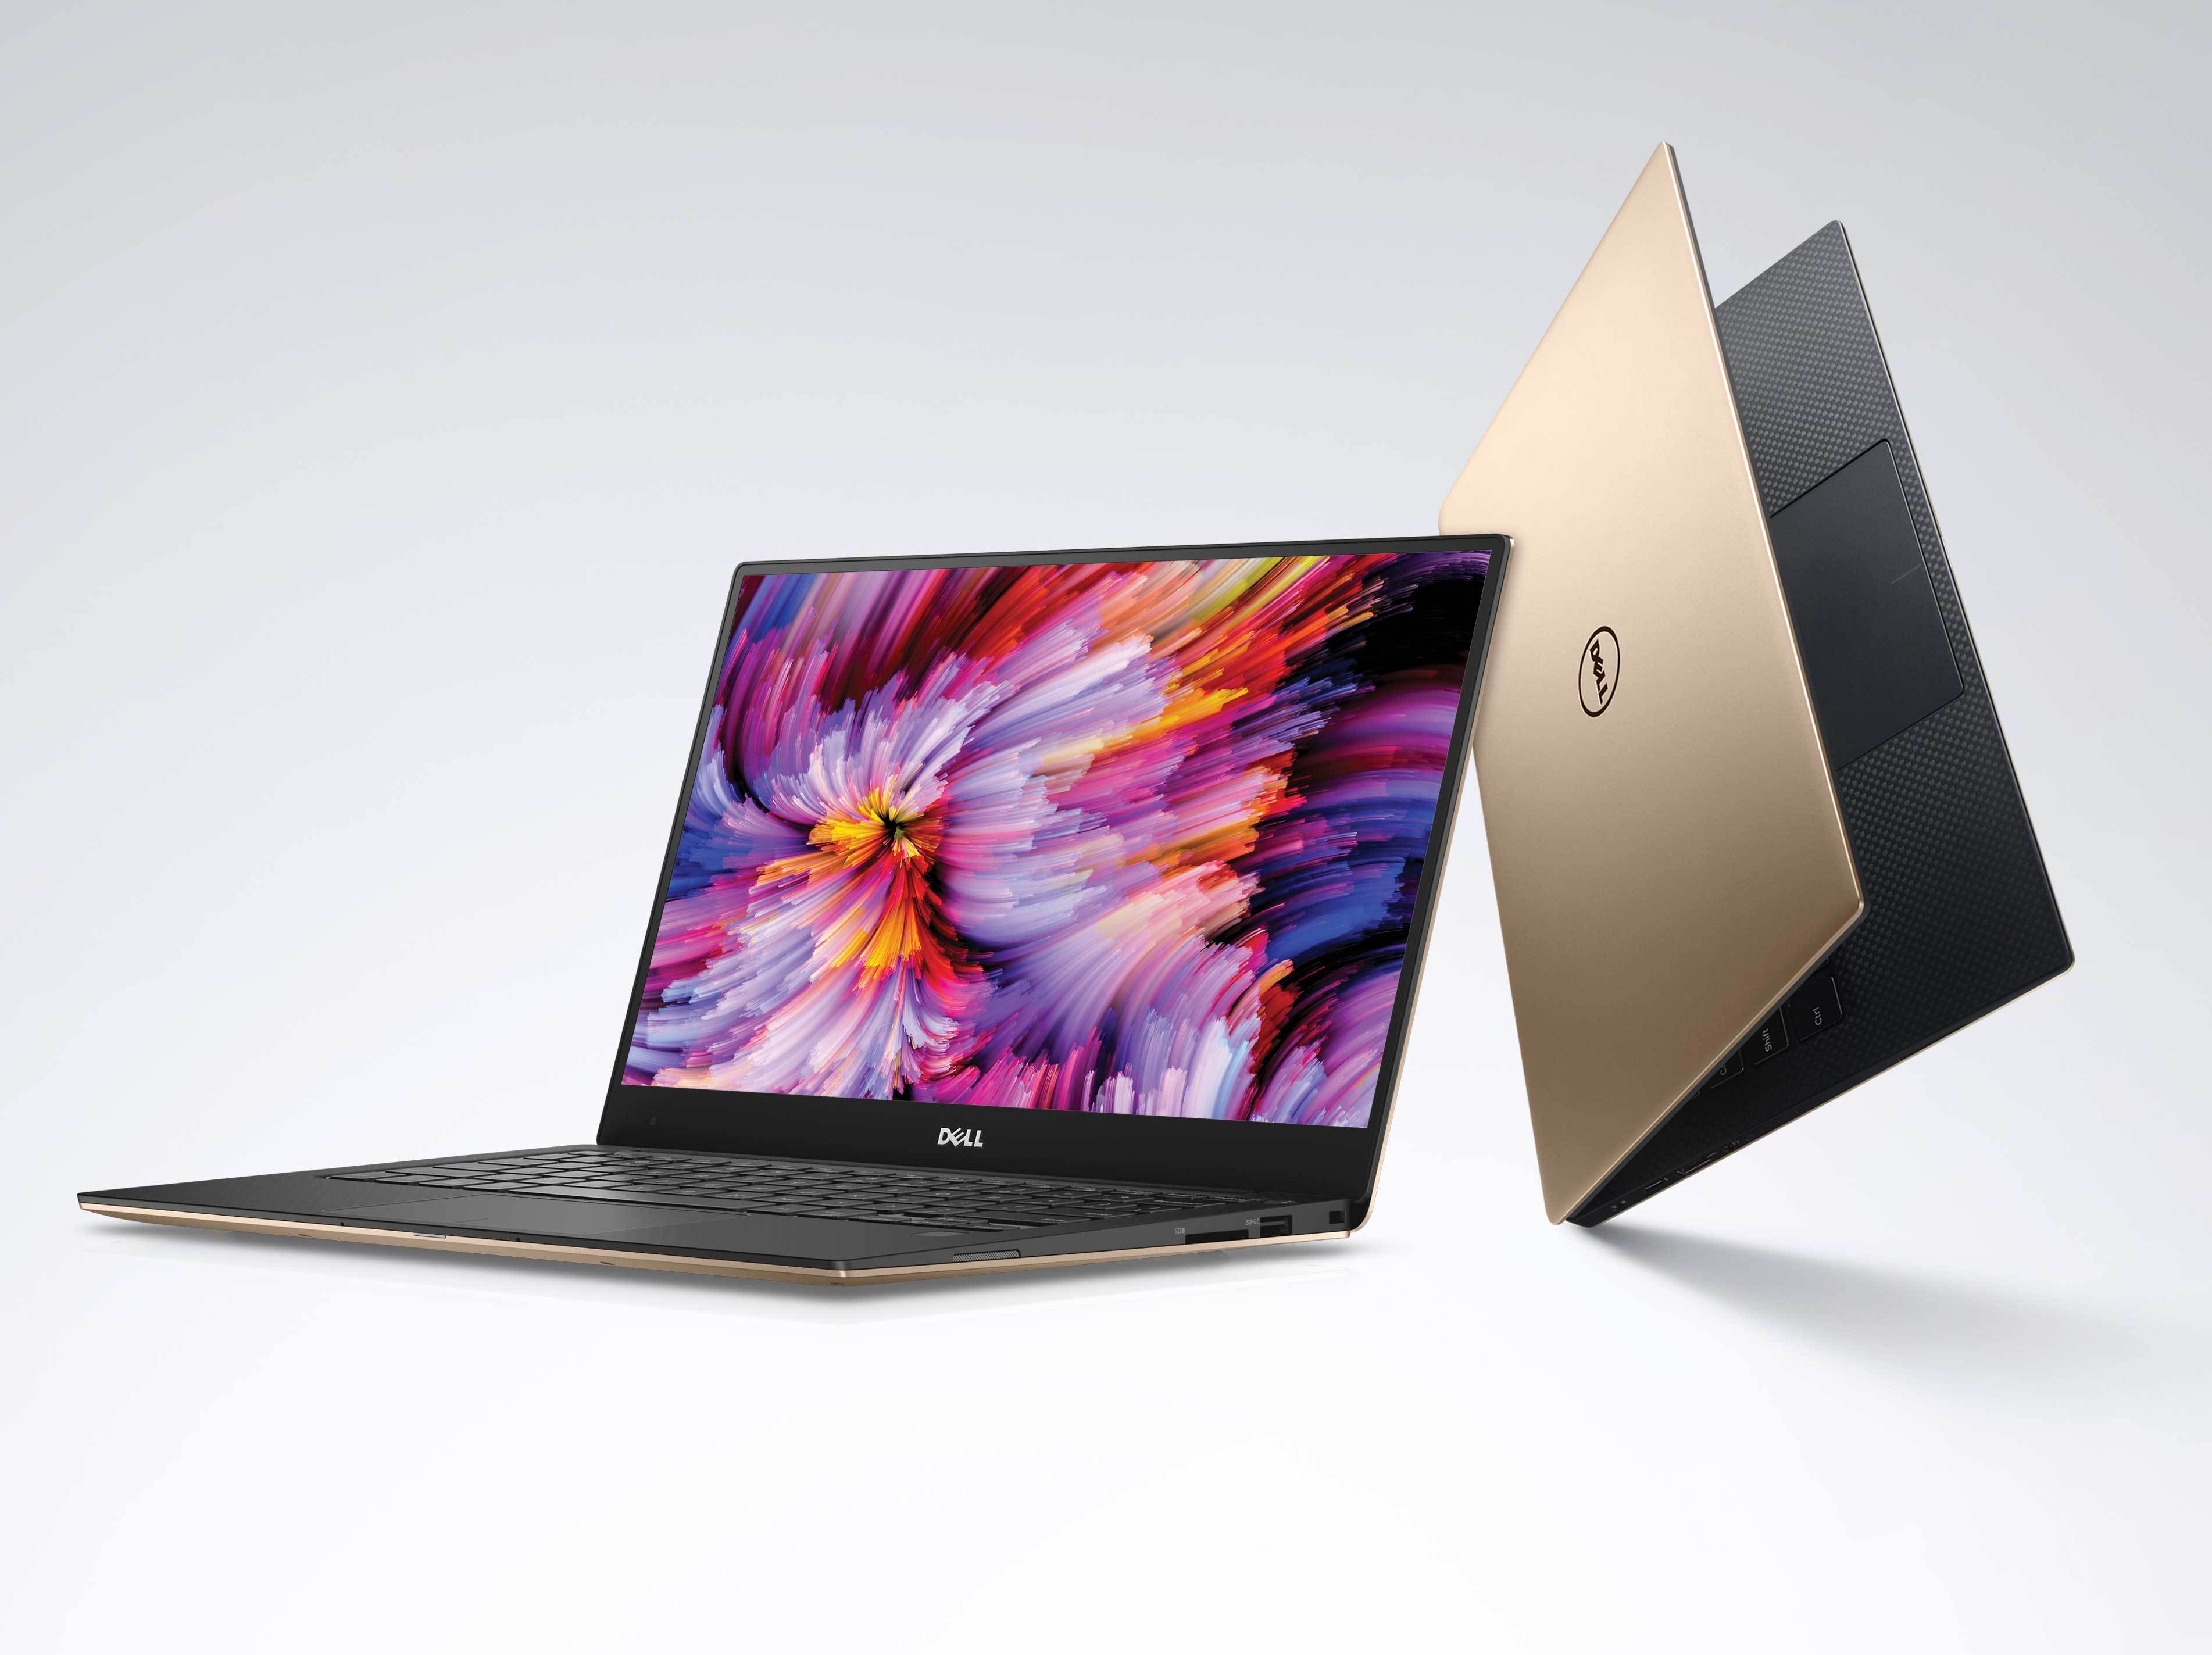 CORRECTING and REPLACING Dell Introduces New Lineup of Laptops with  Stunning Visual Experiences and Performance in Small Form-Factors |  Business Wire